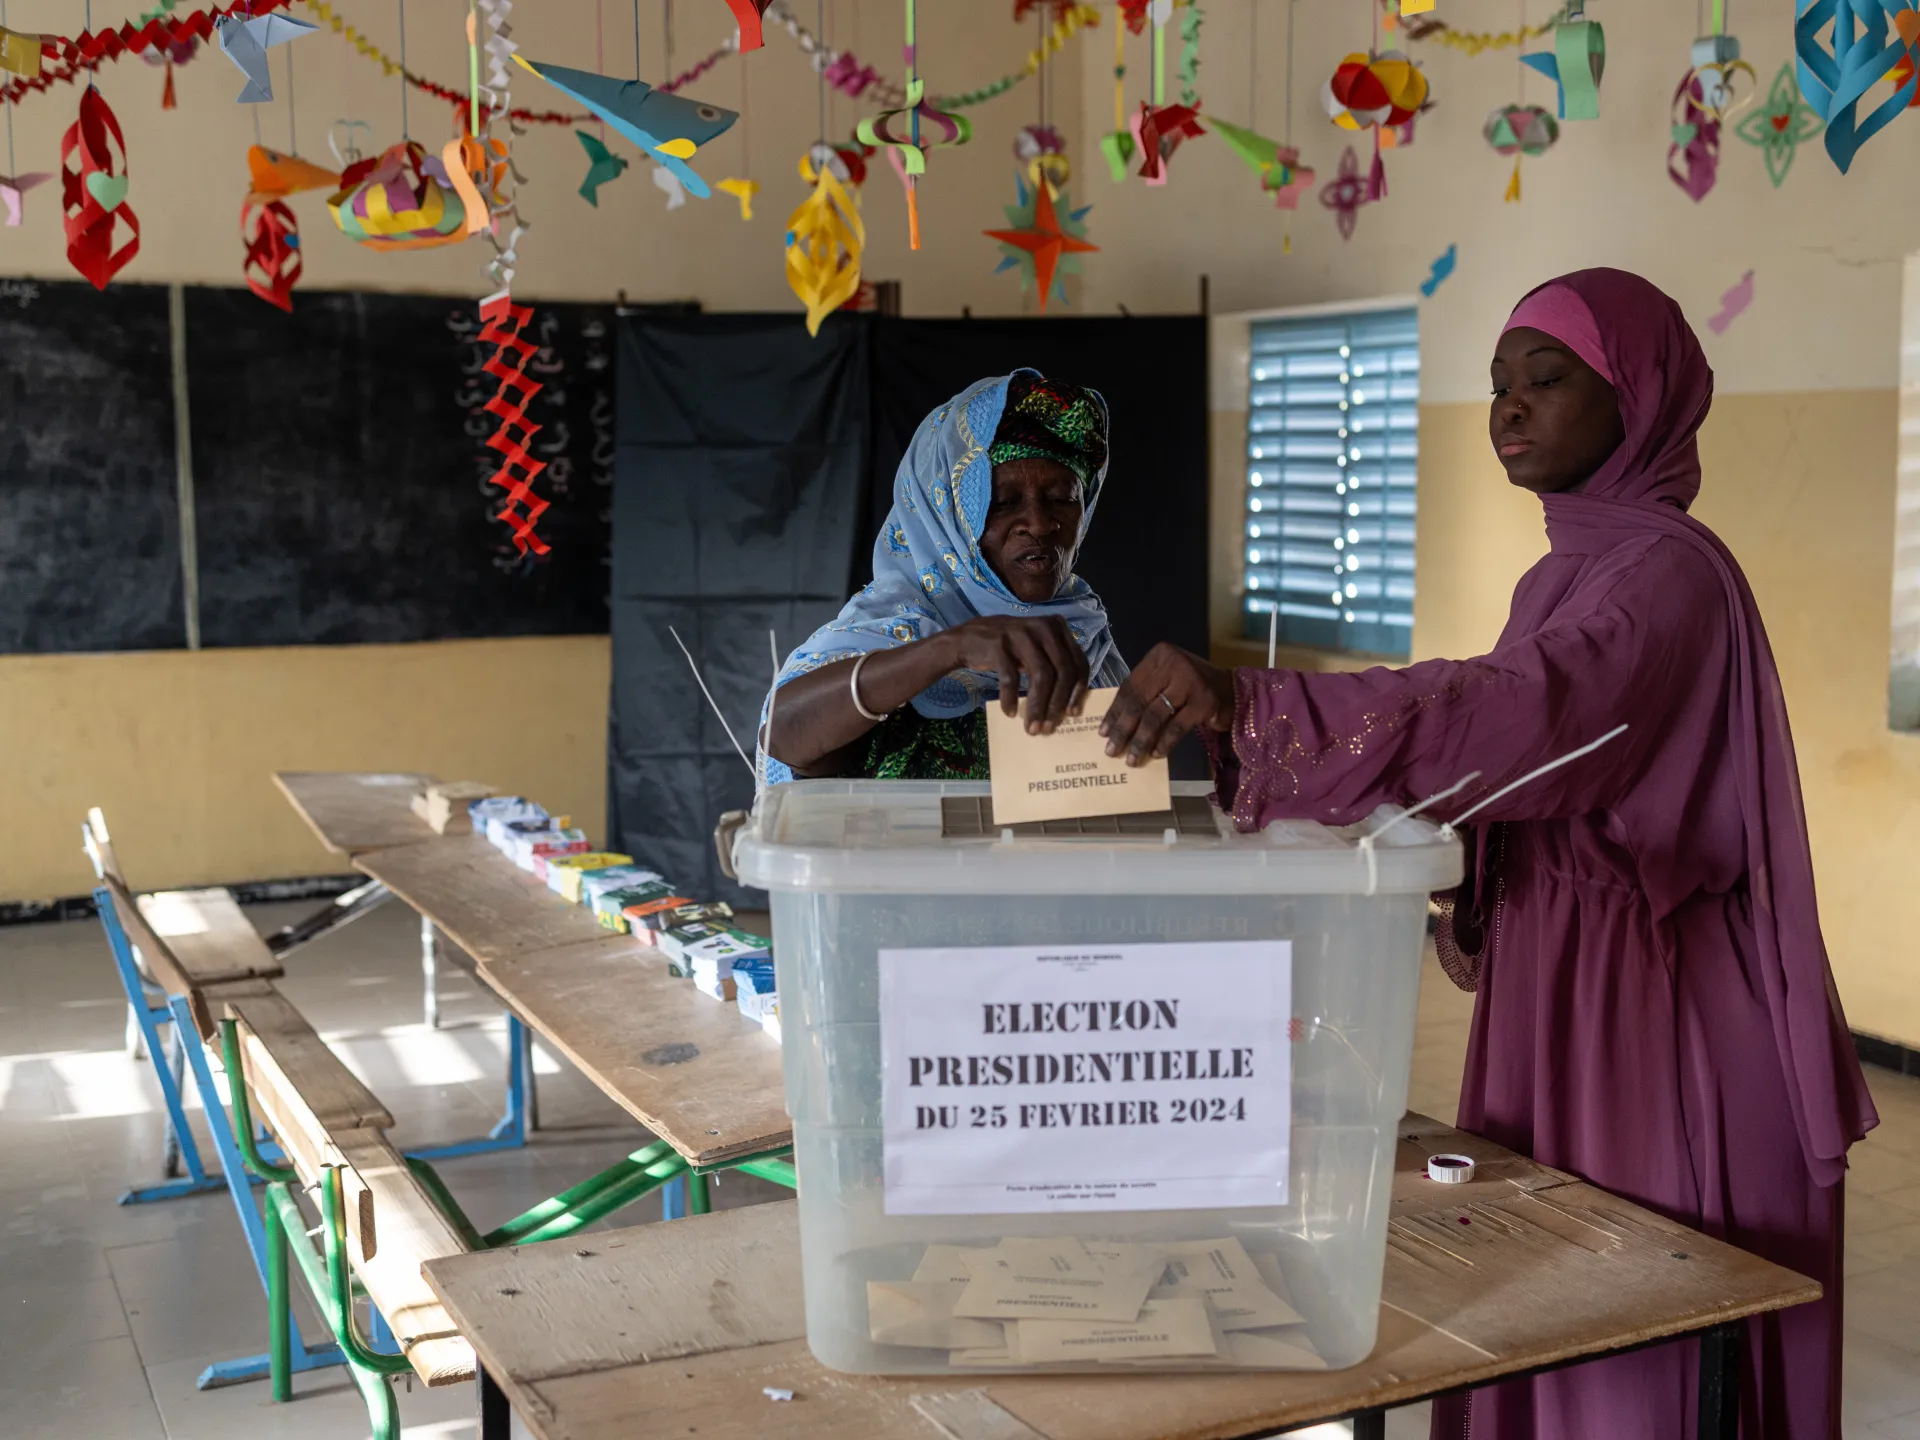 Vote count don start for Senegal presidential election, and opposition candidate Faye dey lead for early count.